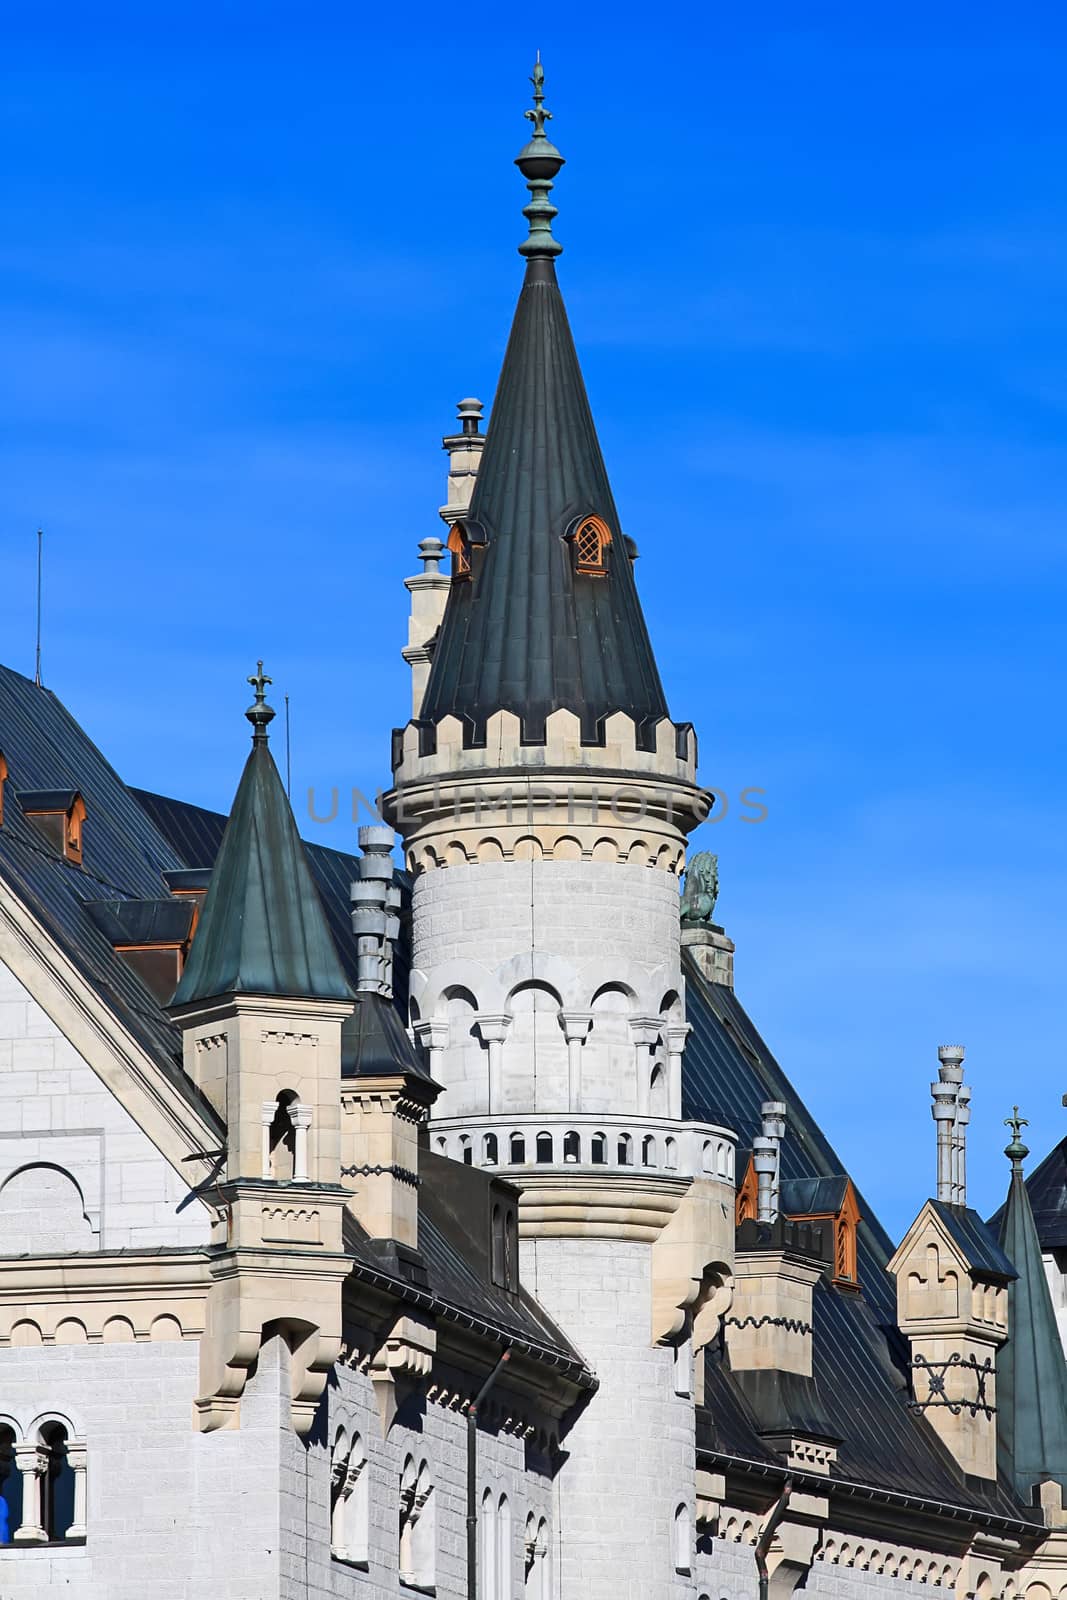 Elements of decoration of the Neuschwanstein castle in Bavarian alps, Germany